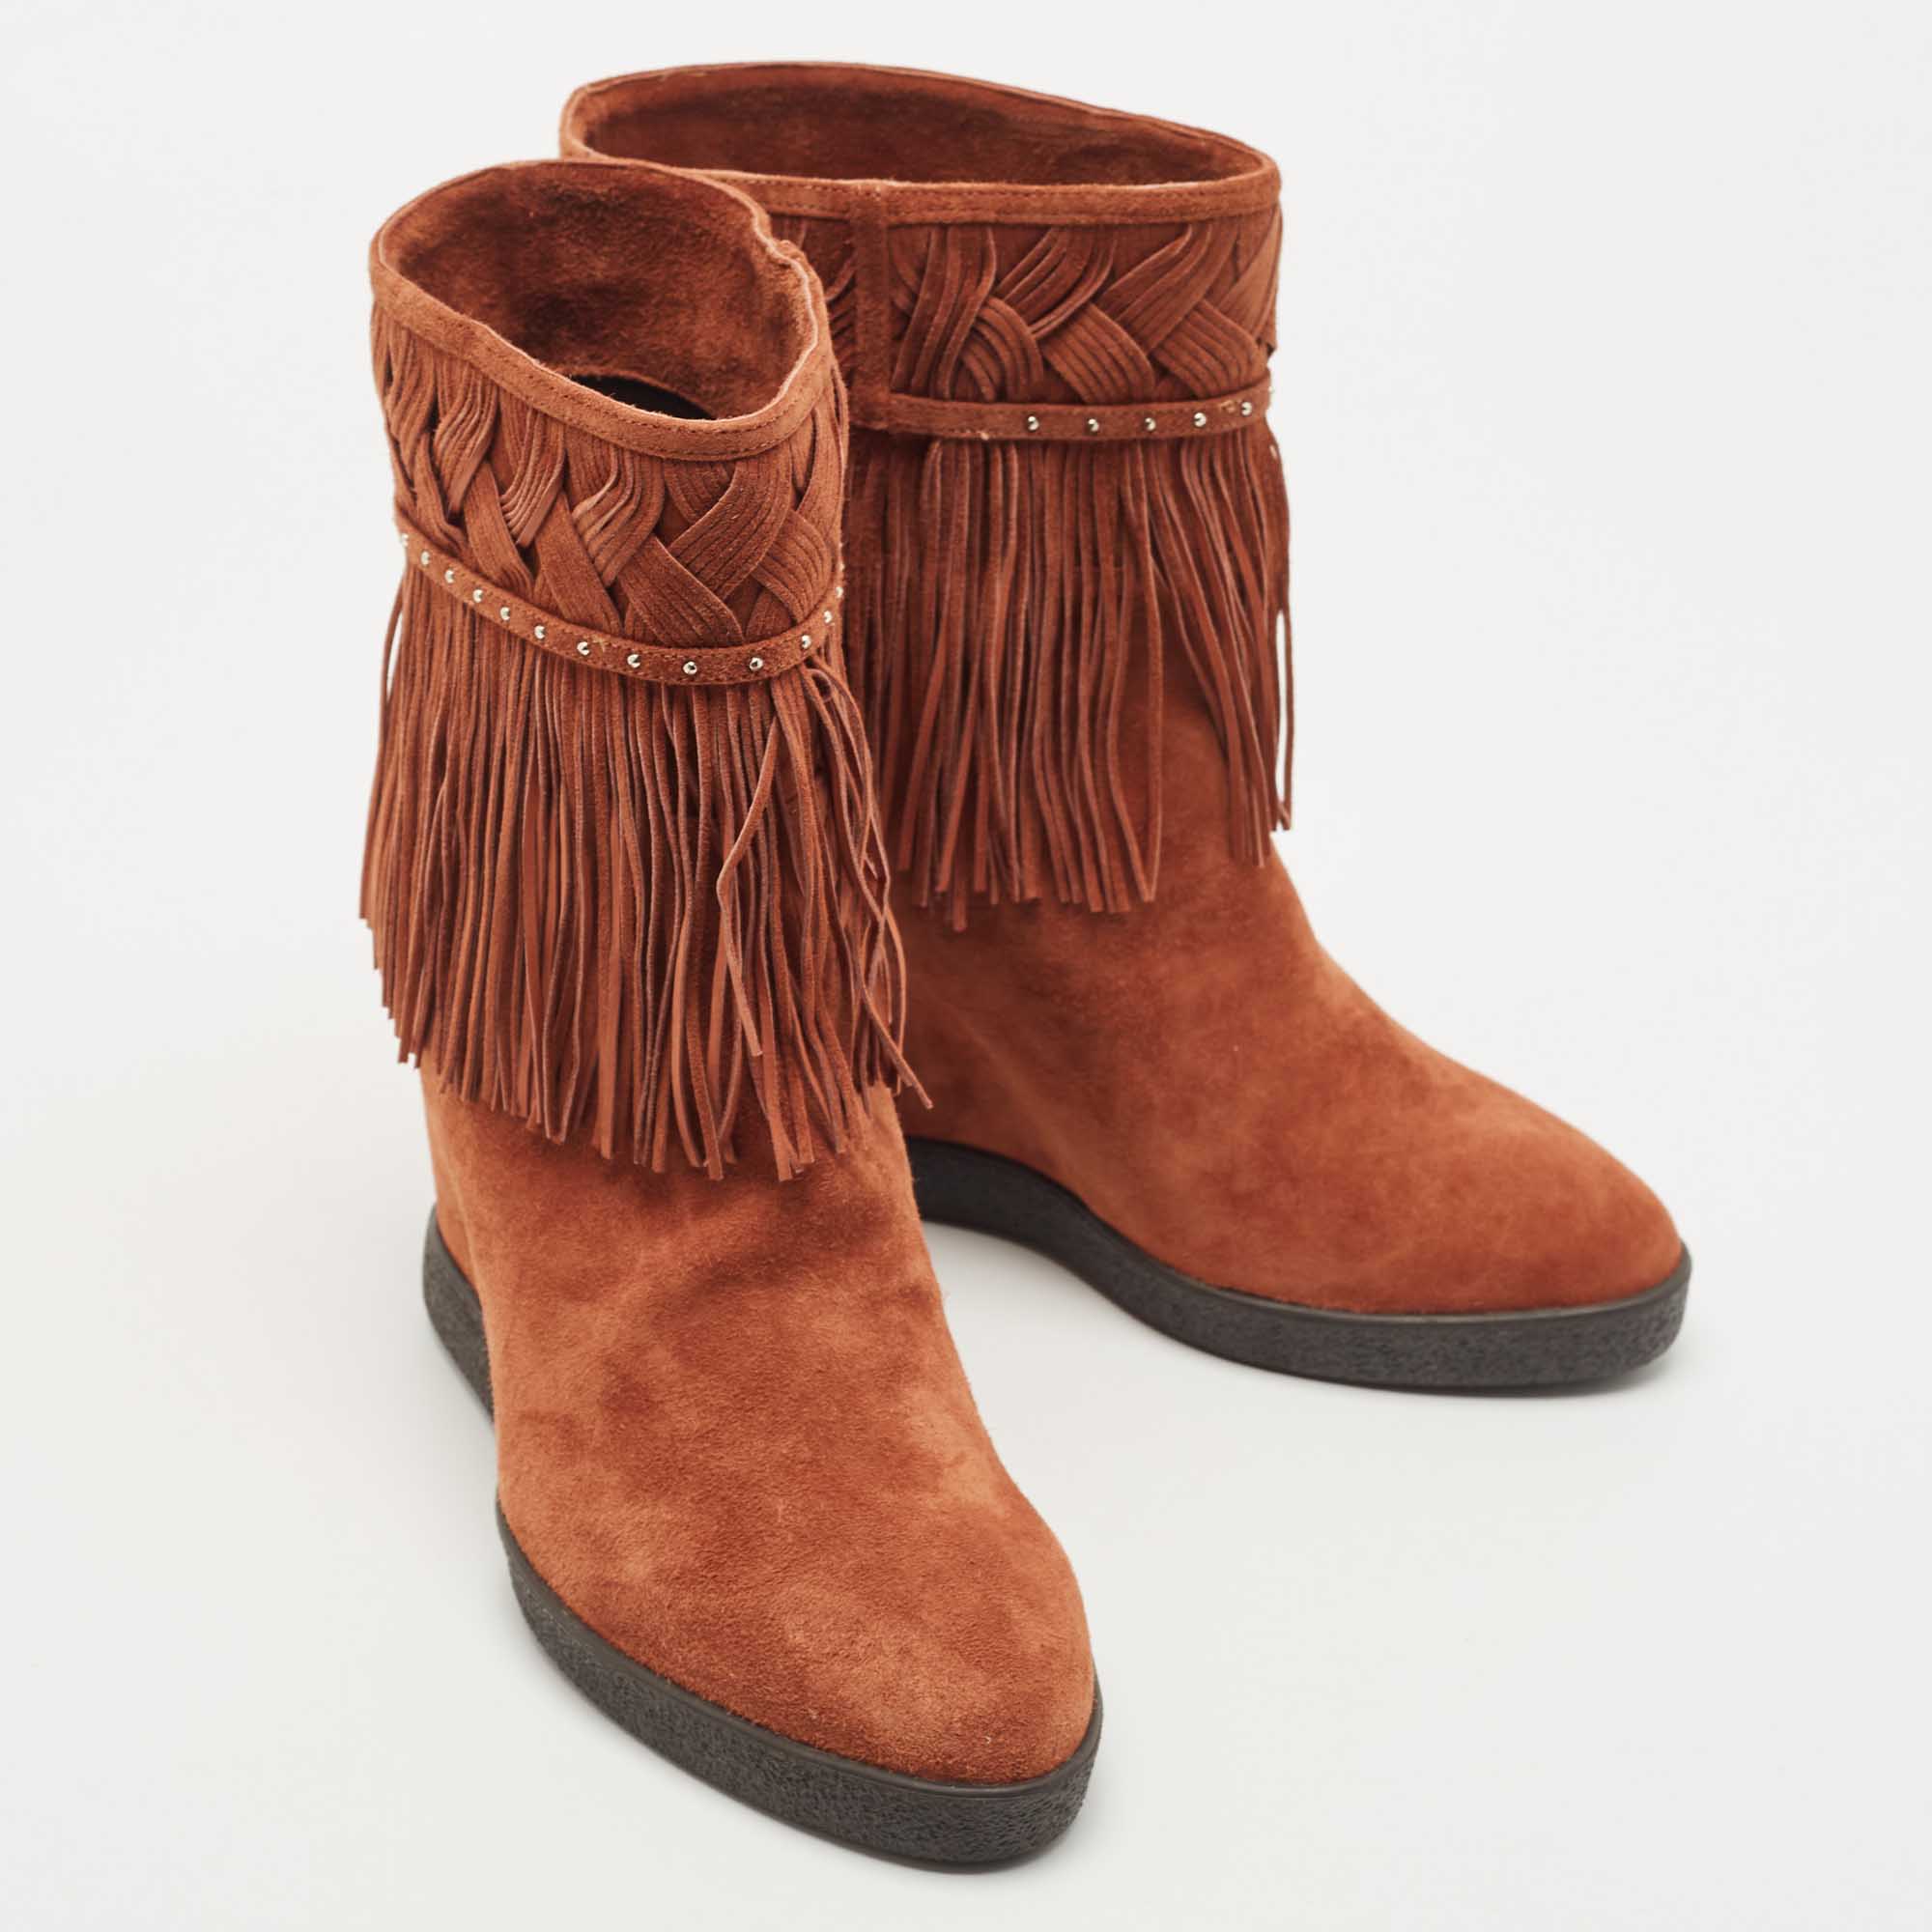 Le Silla Brown Suede Fringe Ankle Length Boots Size 38.5